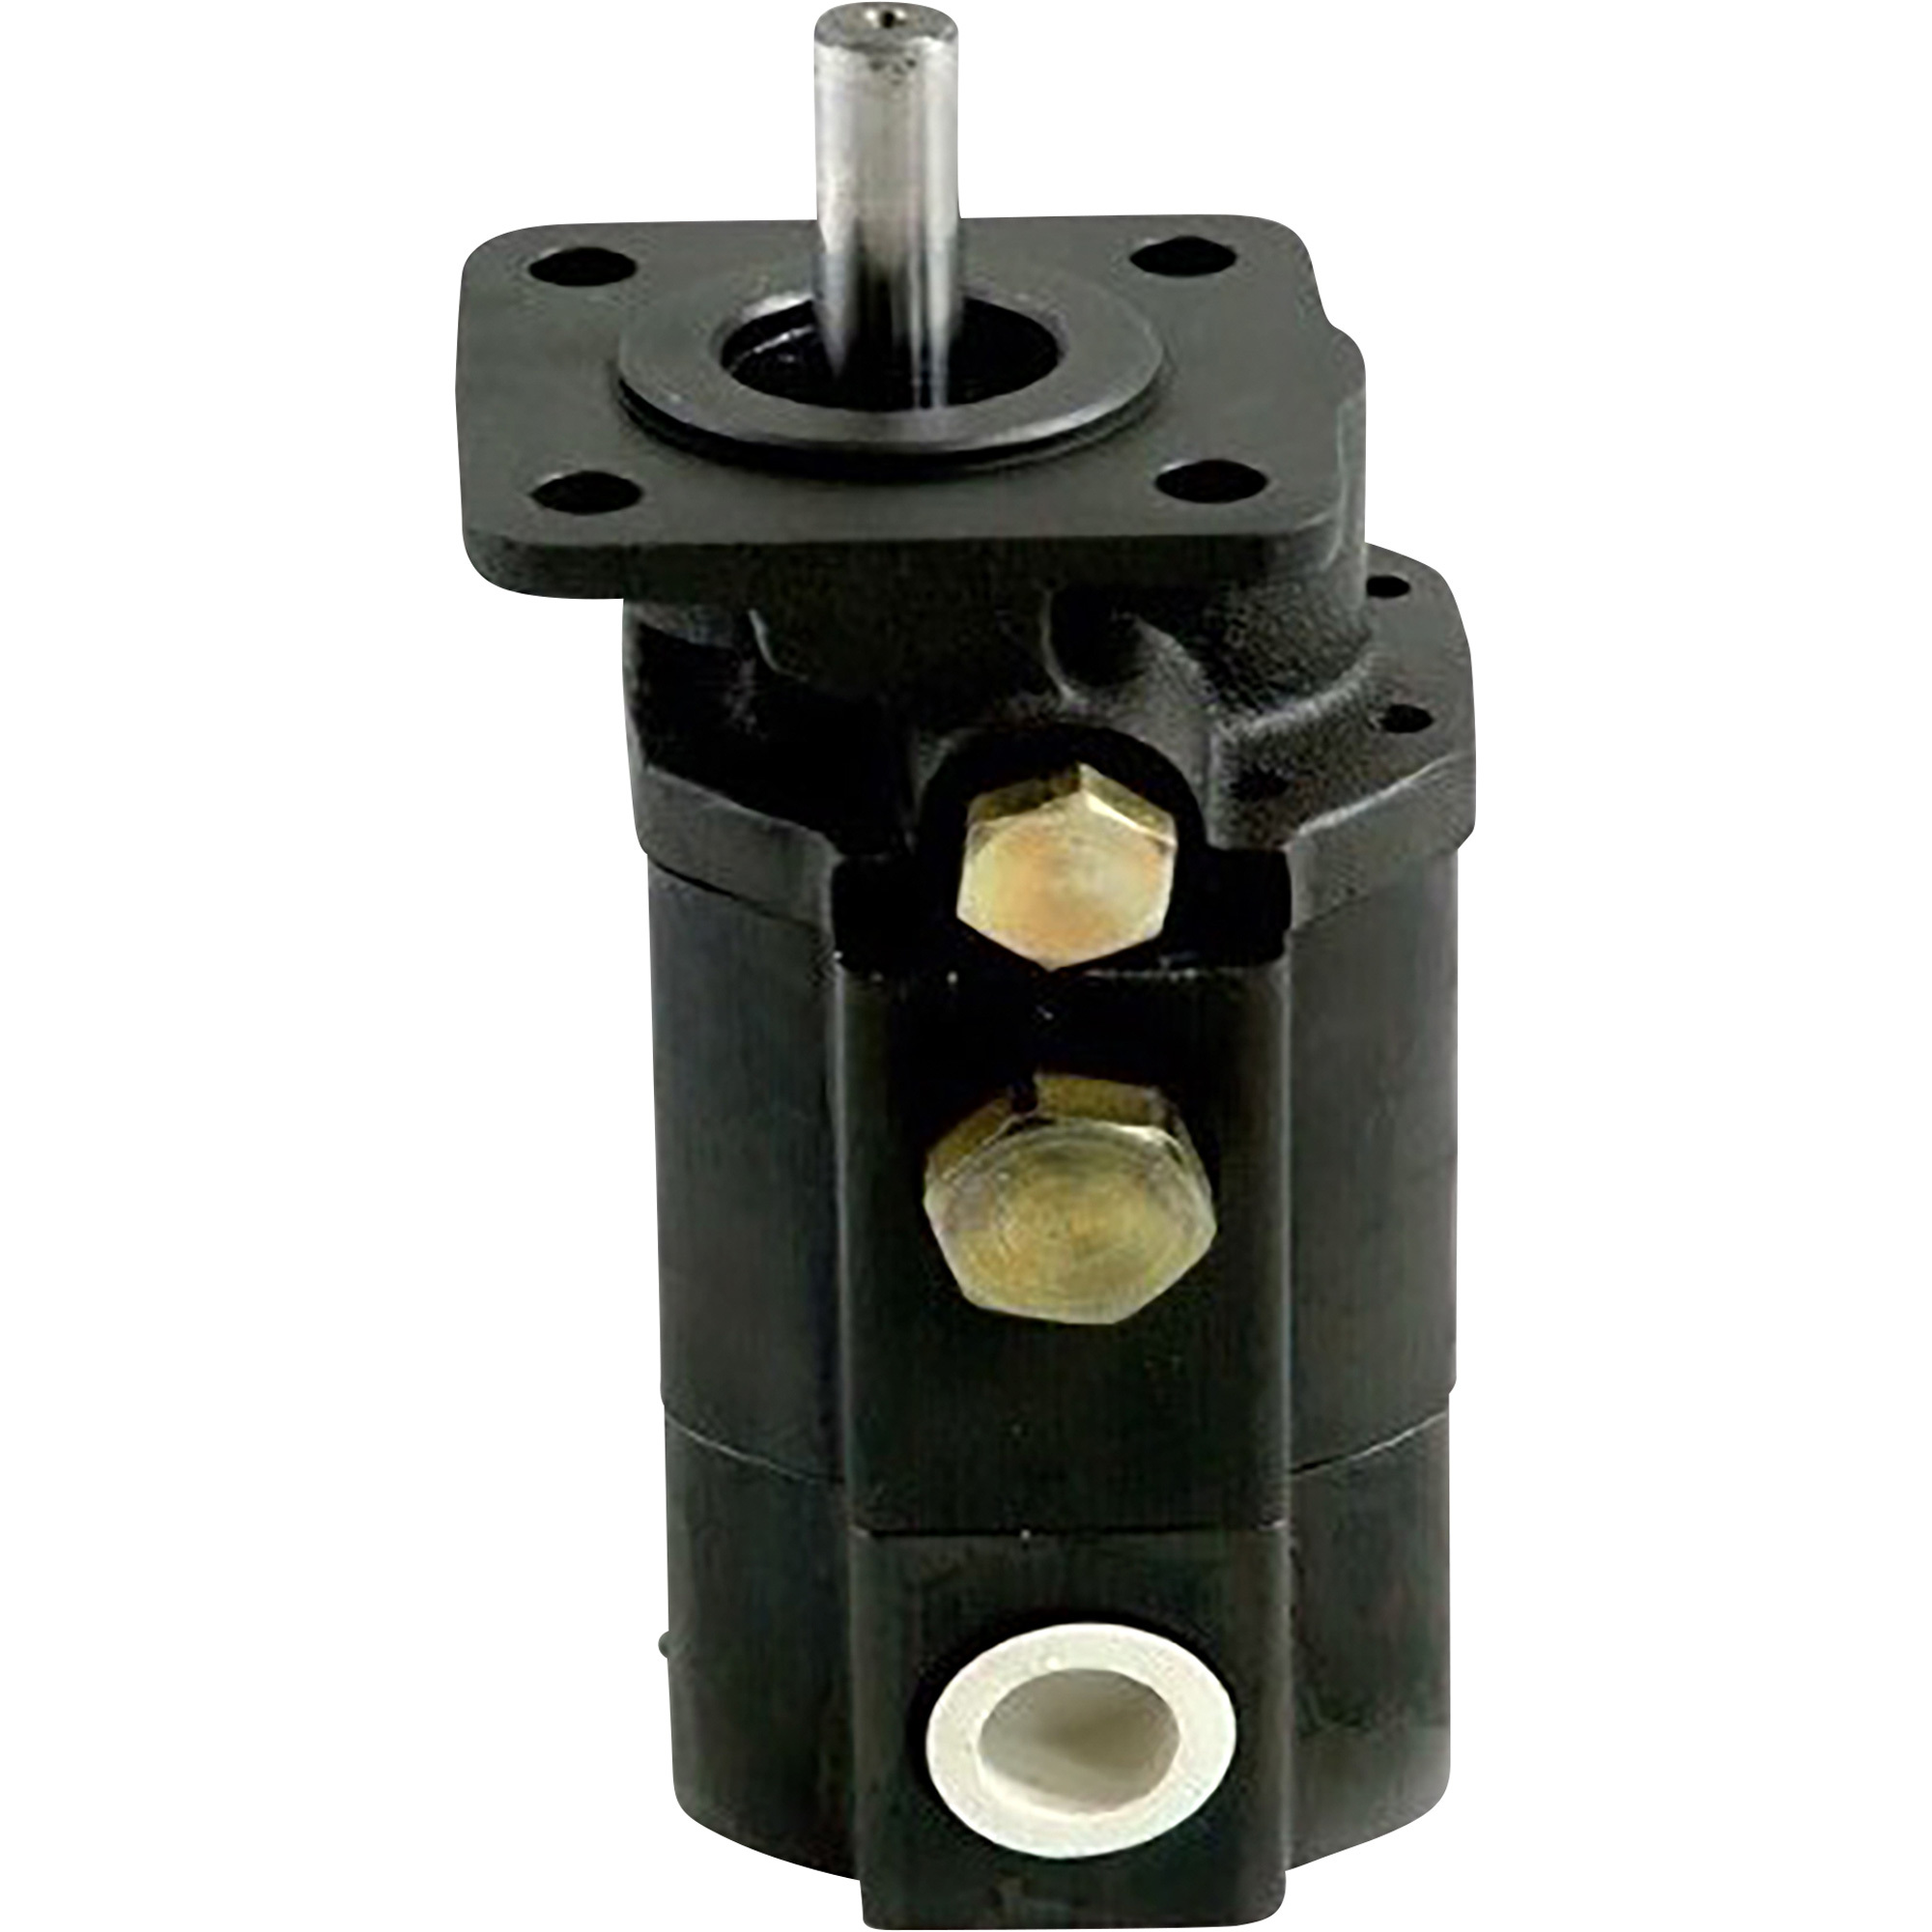 NorTrac Cast Iron Two-Stage High/Low Gear Pump with NPT Portsâ 11 GPM, 1/2Inch Diameter Shaft, Model CBT-8.8/3.0 NPT PORTS